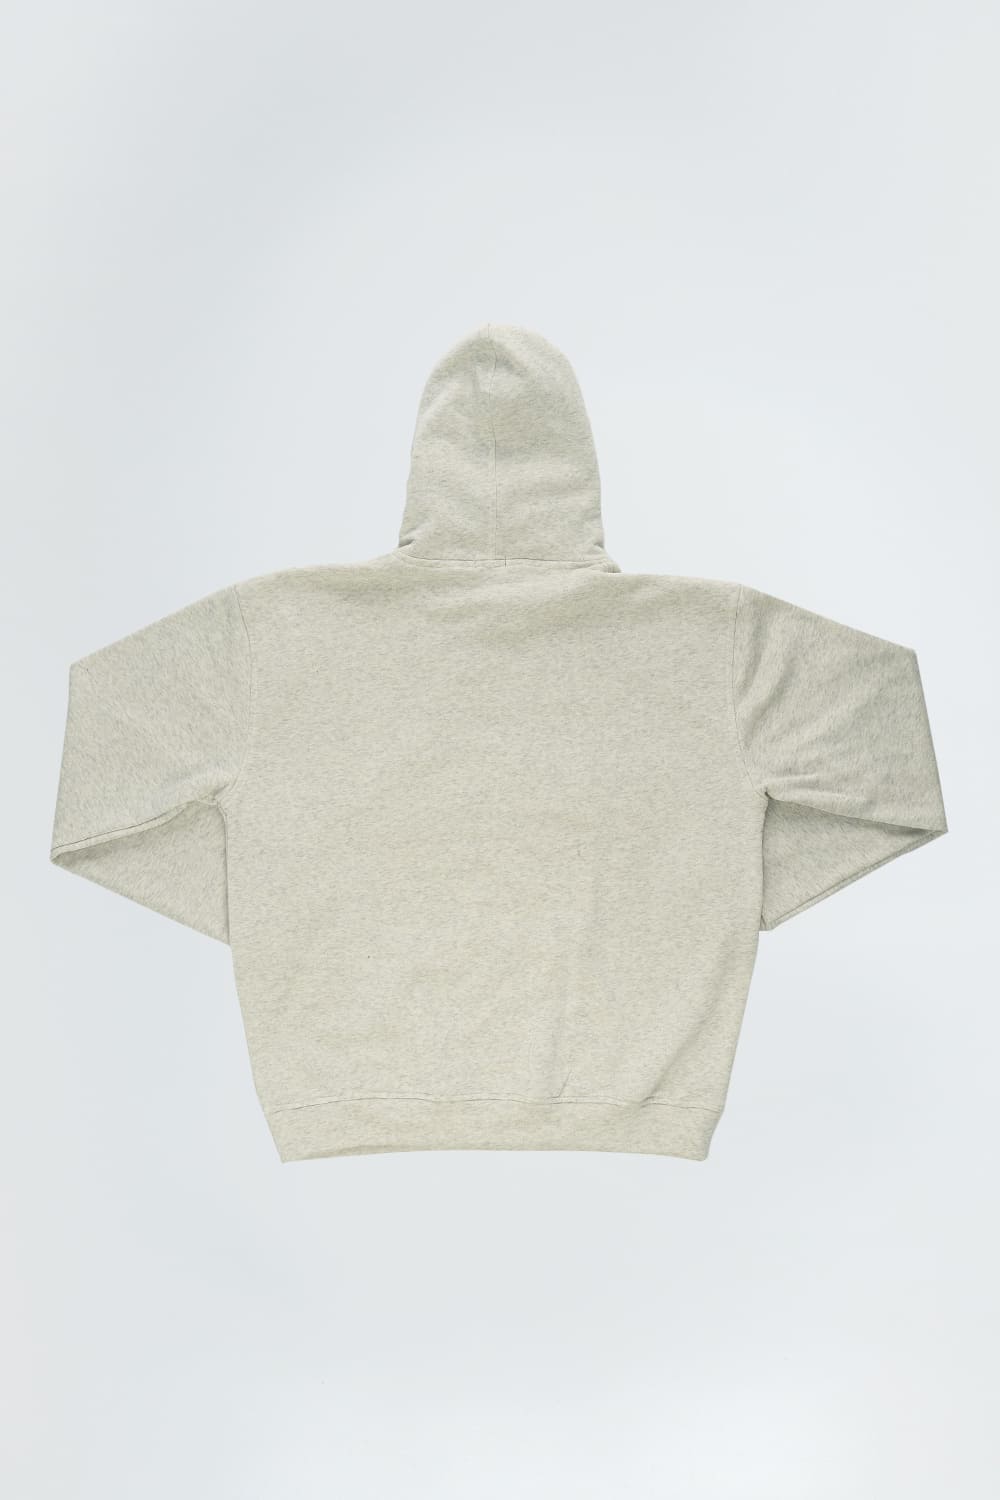 BCO 2.0 Classic Hoodie - SAND 8315